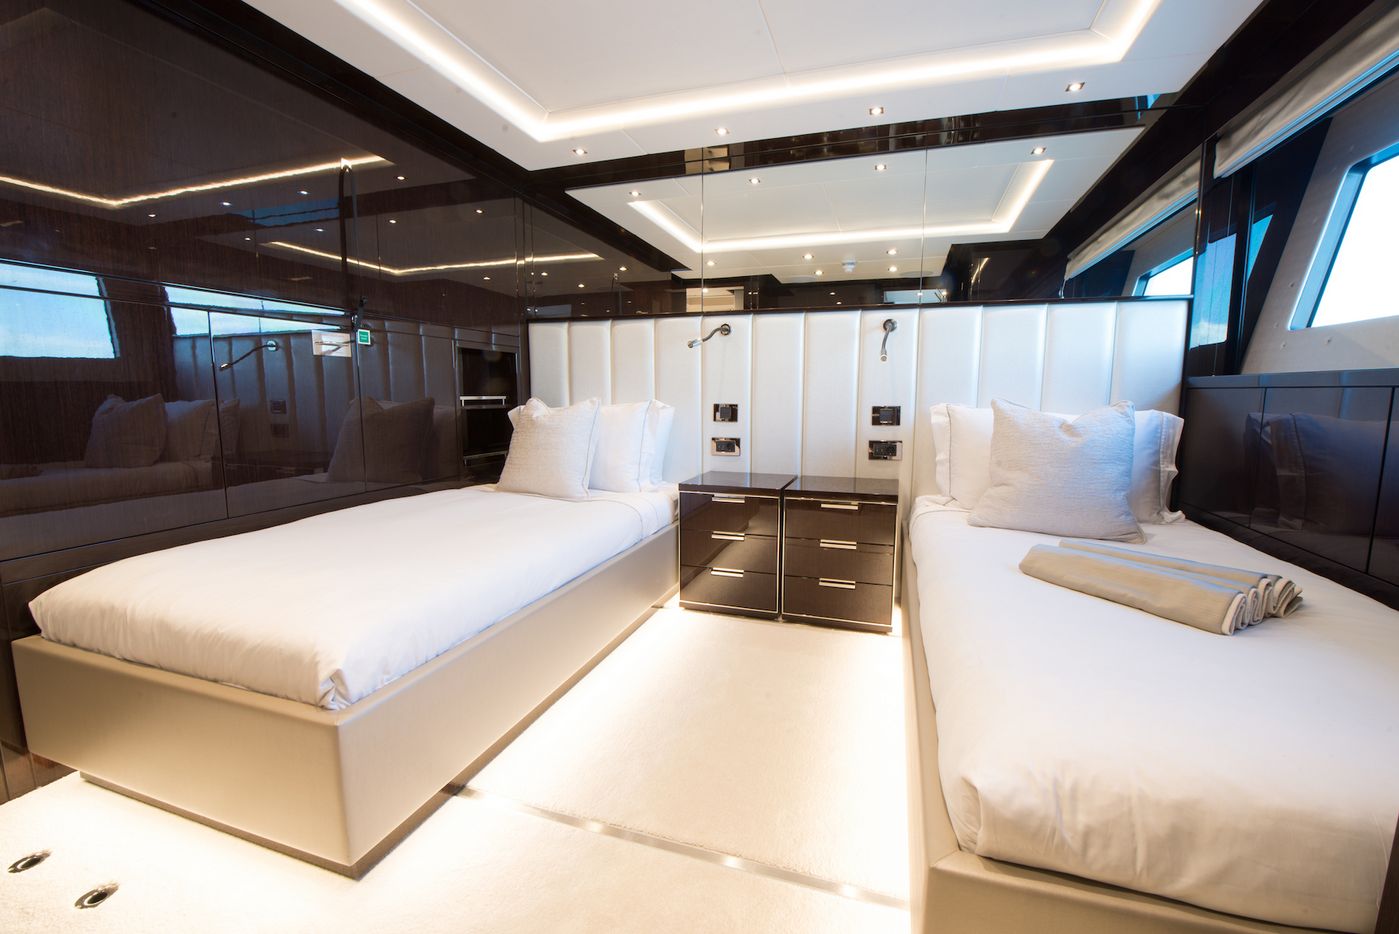 Sunseeker Aqua Libra super yacht charter ultimate sailing experience in Greece - High Point Yachting